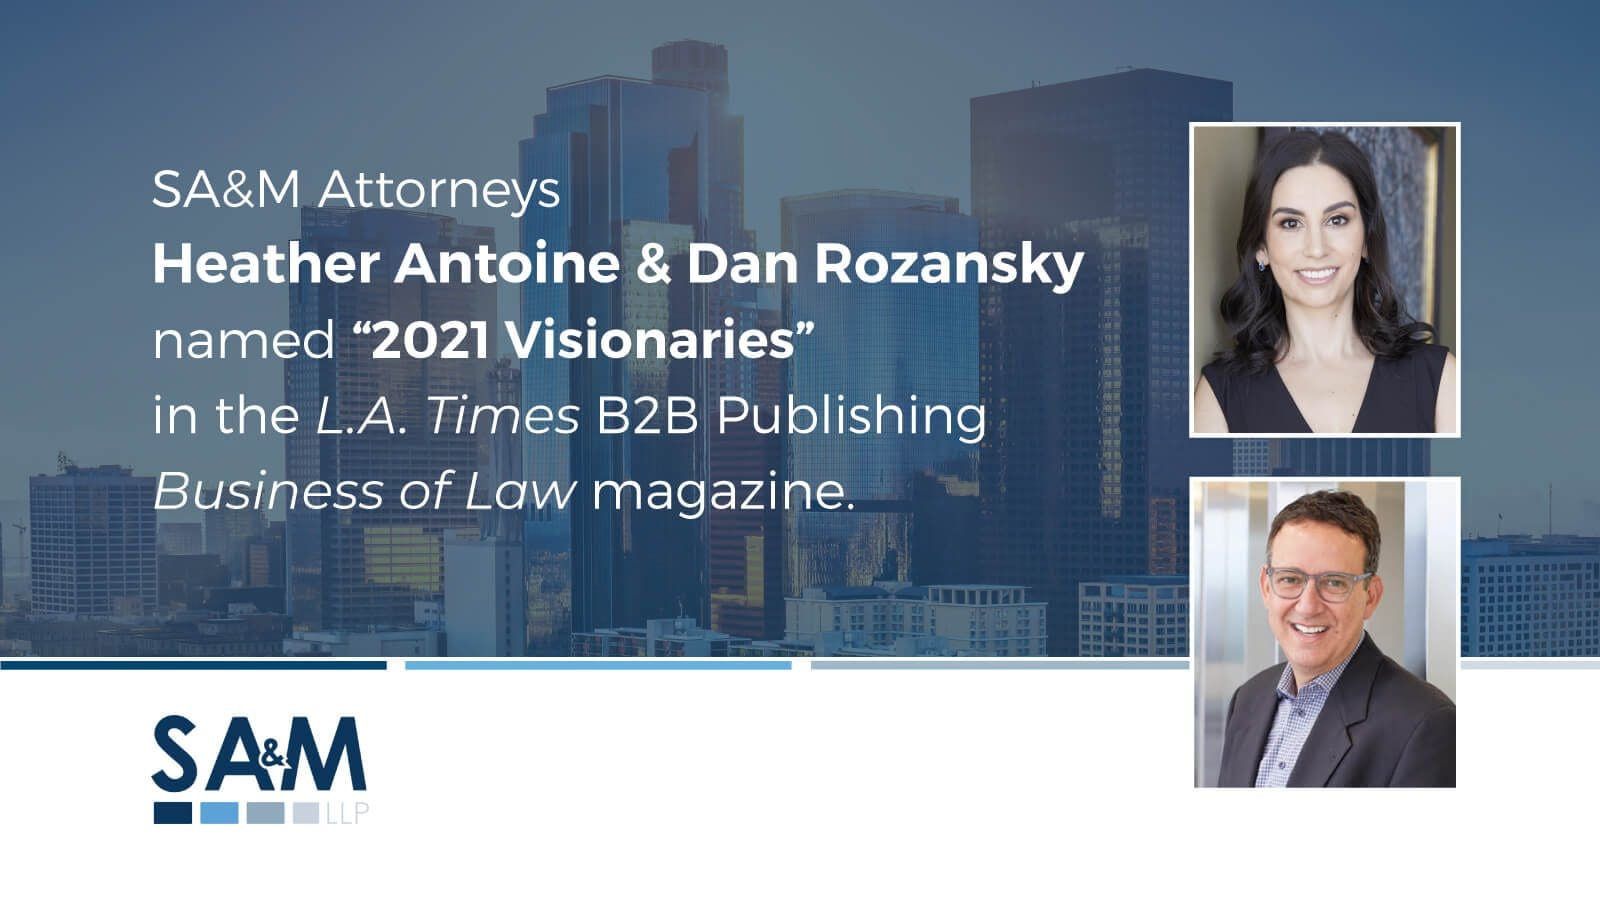 Heather Antoine and Dan Rozansky Honored as 2021 “Visionaries” by L.A. Times B2B Publishing Business of Law Magazine